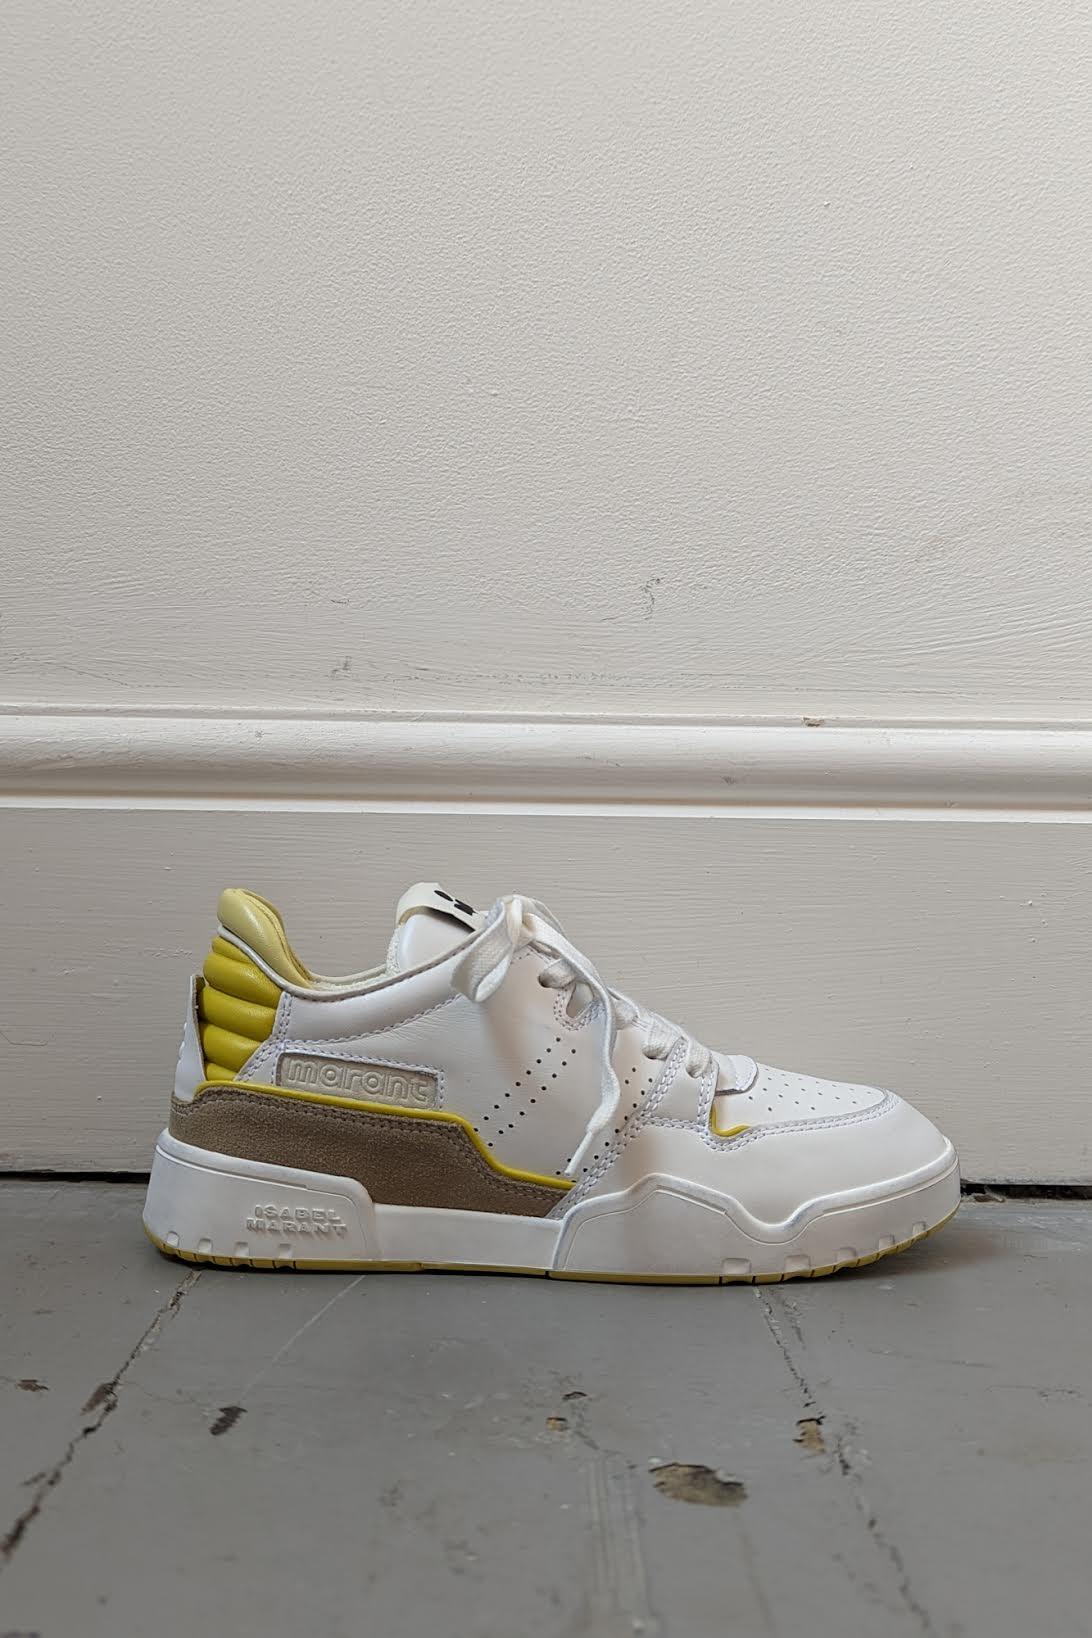 Isabel Marant - Emree White & Yellow Sneakers - 32 The Guild